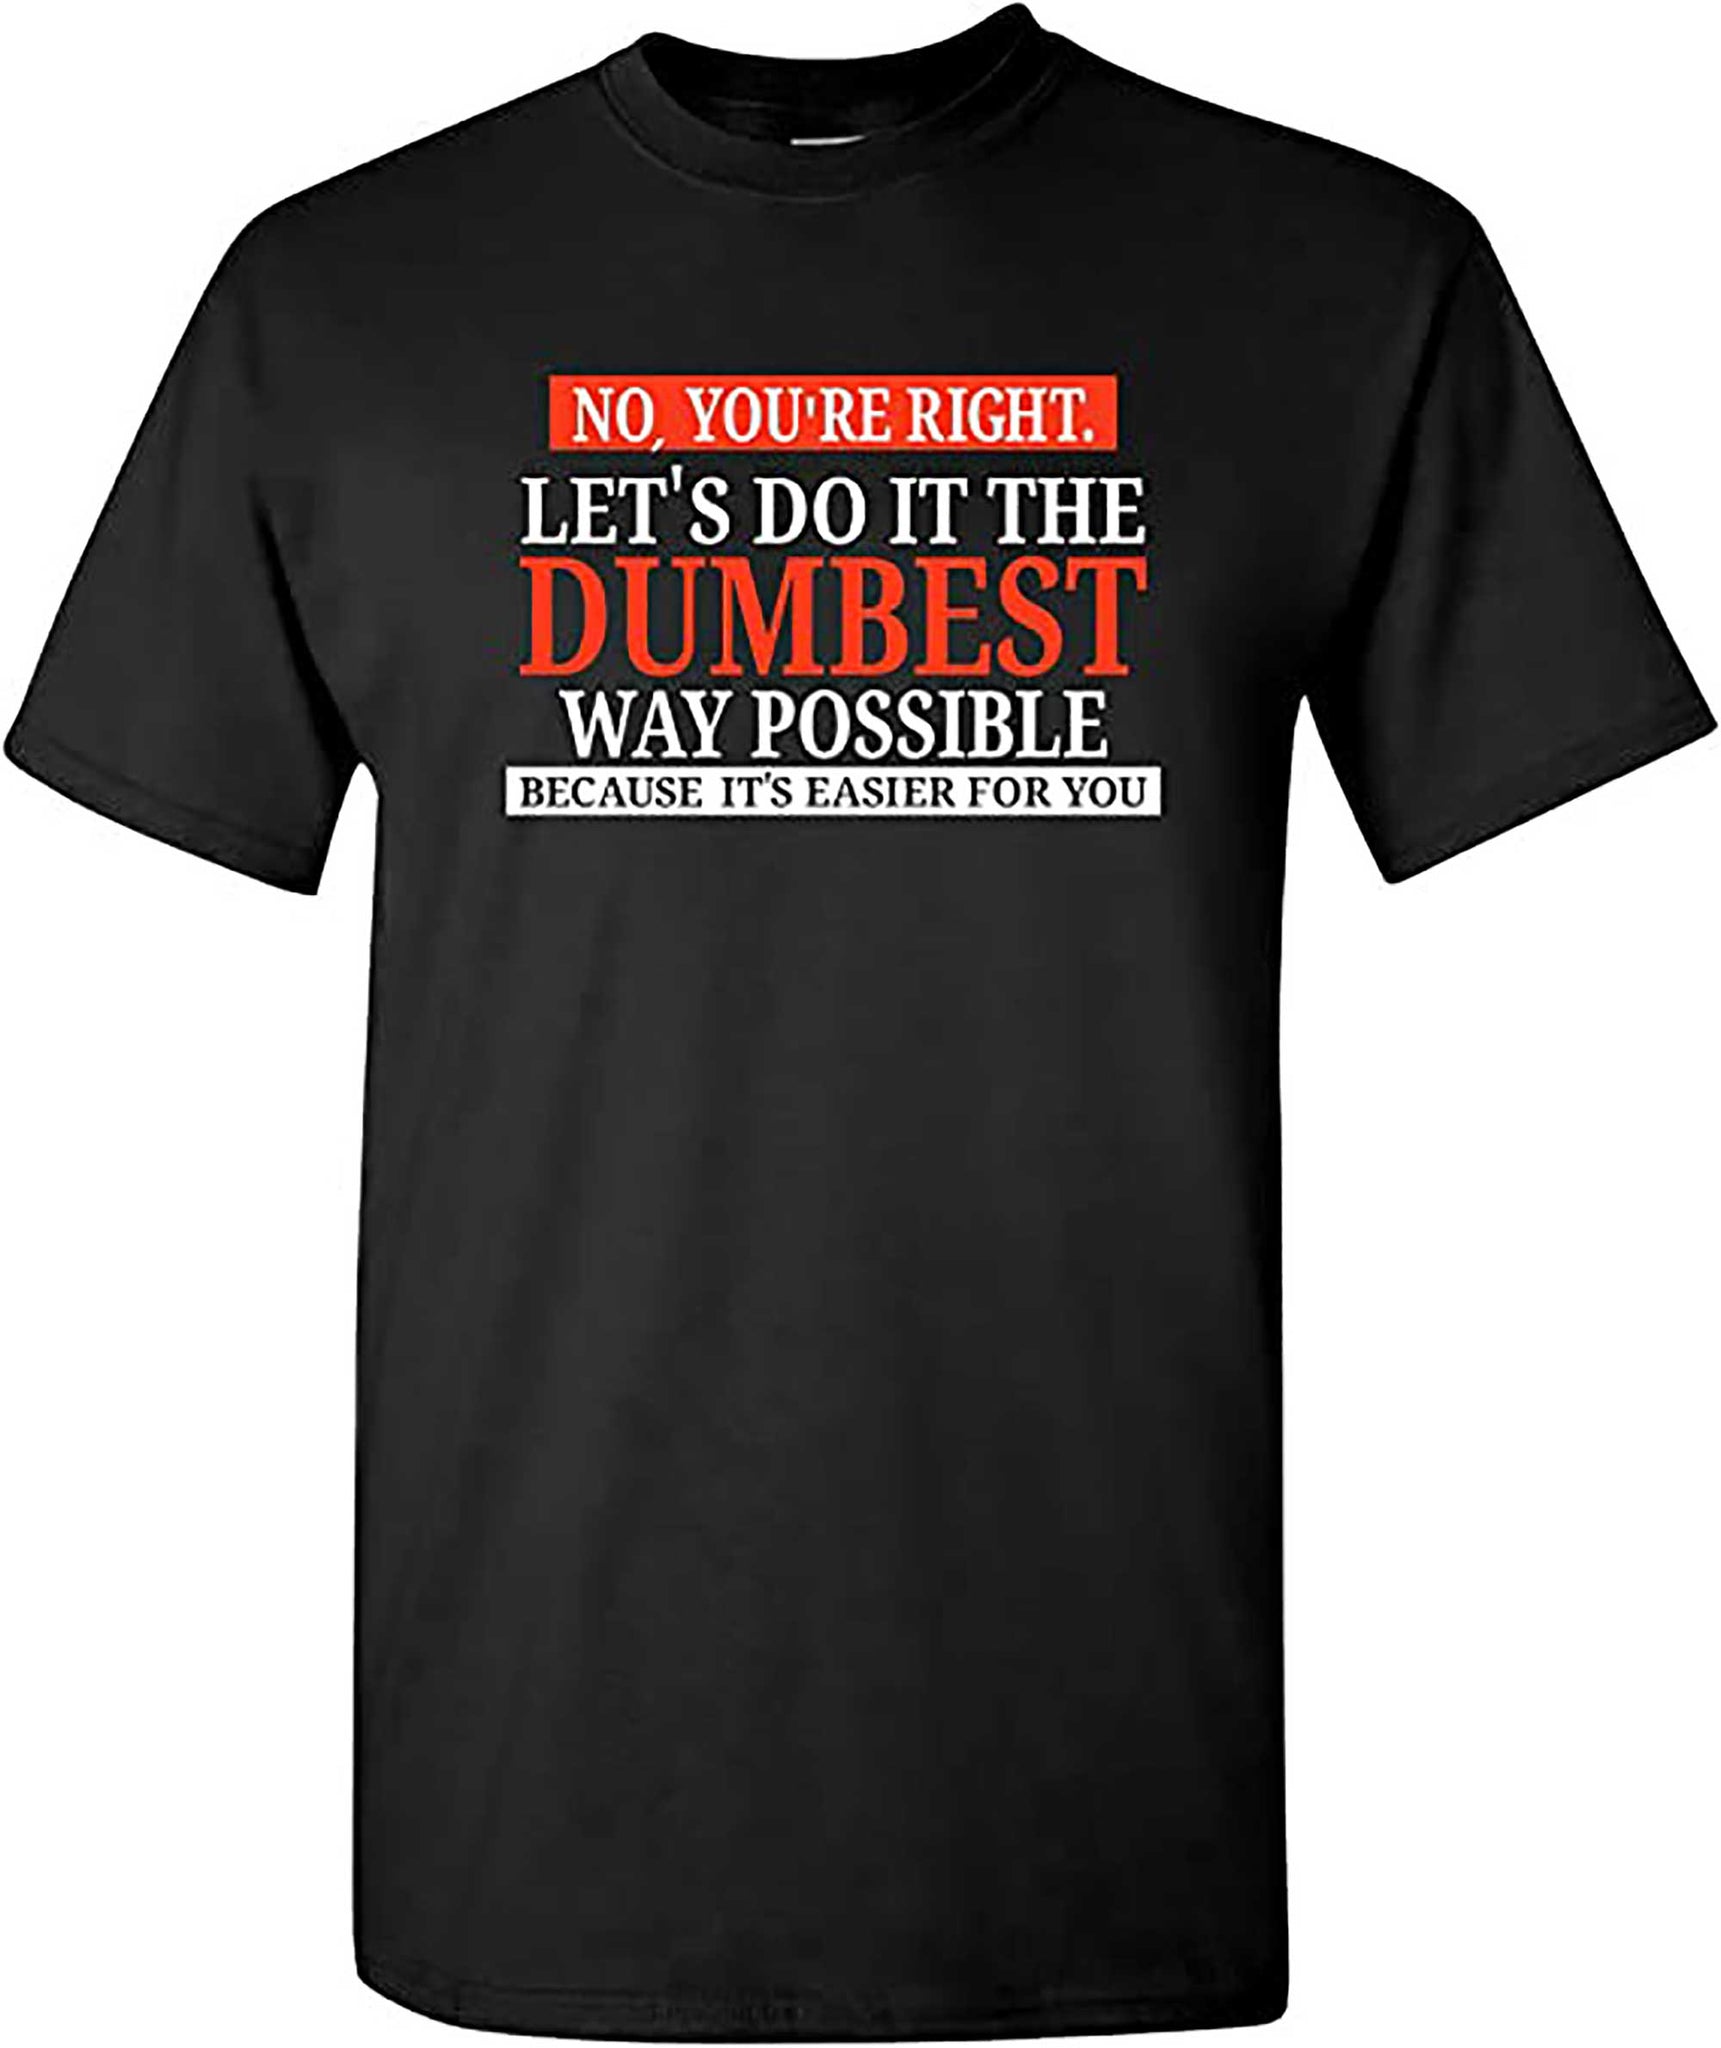 No Youre Right Lets Do It The Dumbest Way Possible   Funny Sarcastic Humor Graphic T Shirt